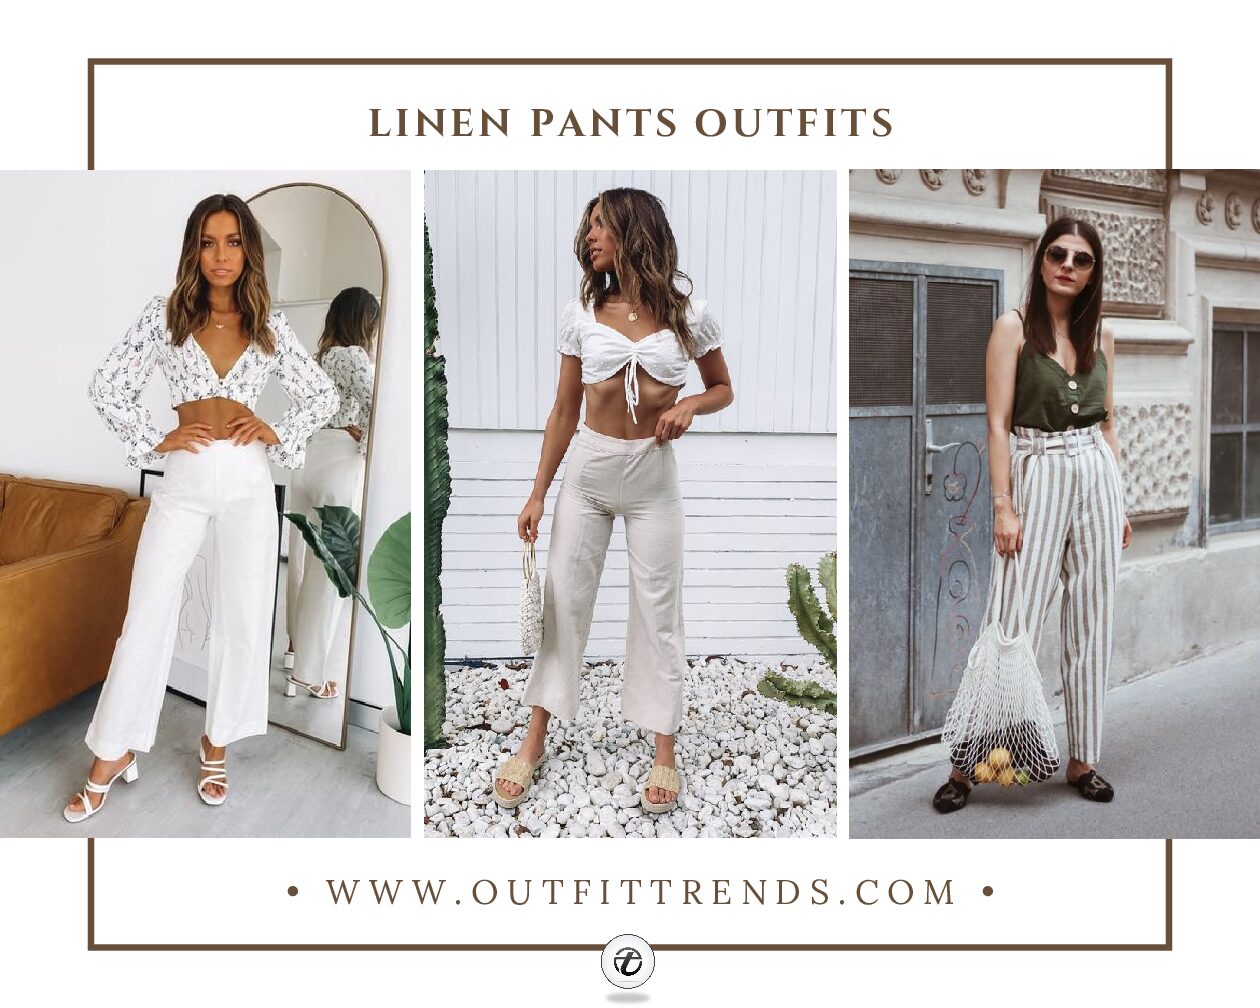 Linen Pants Outfits - 20 Ideas on How To Wear Linen Pants